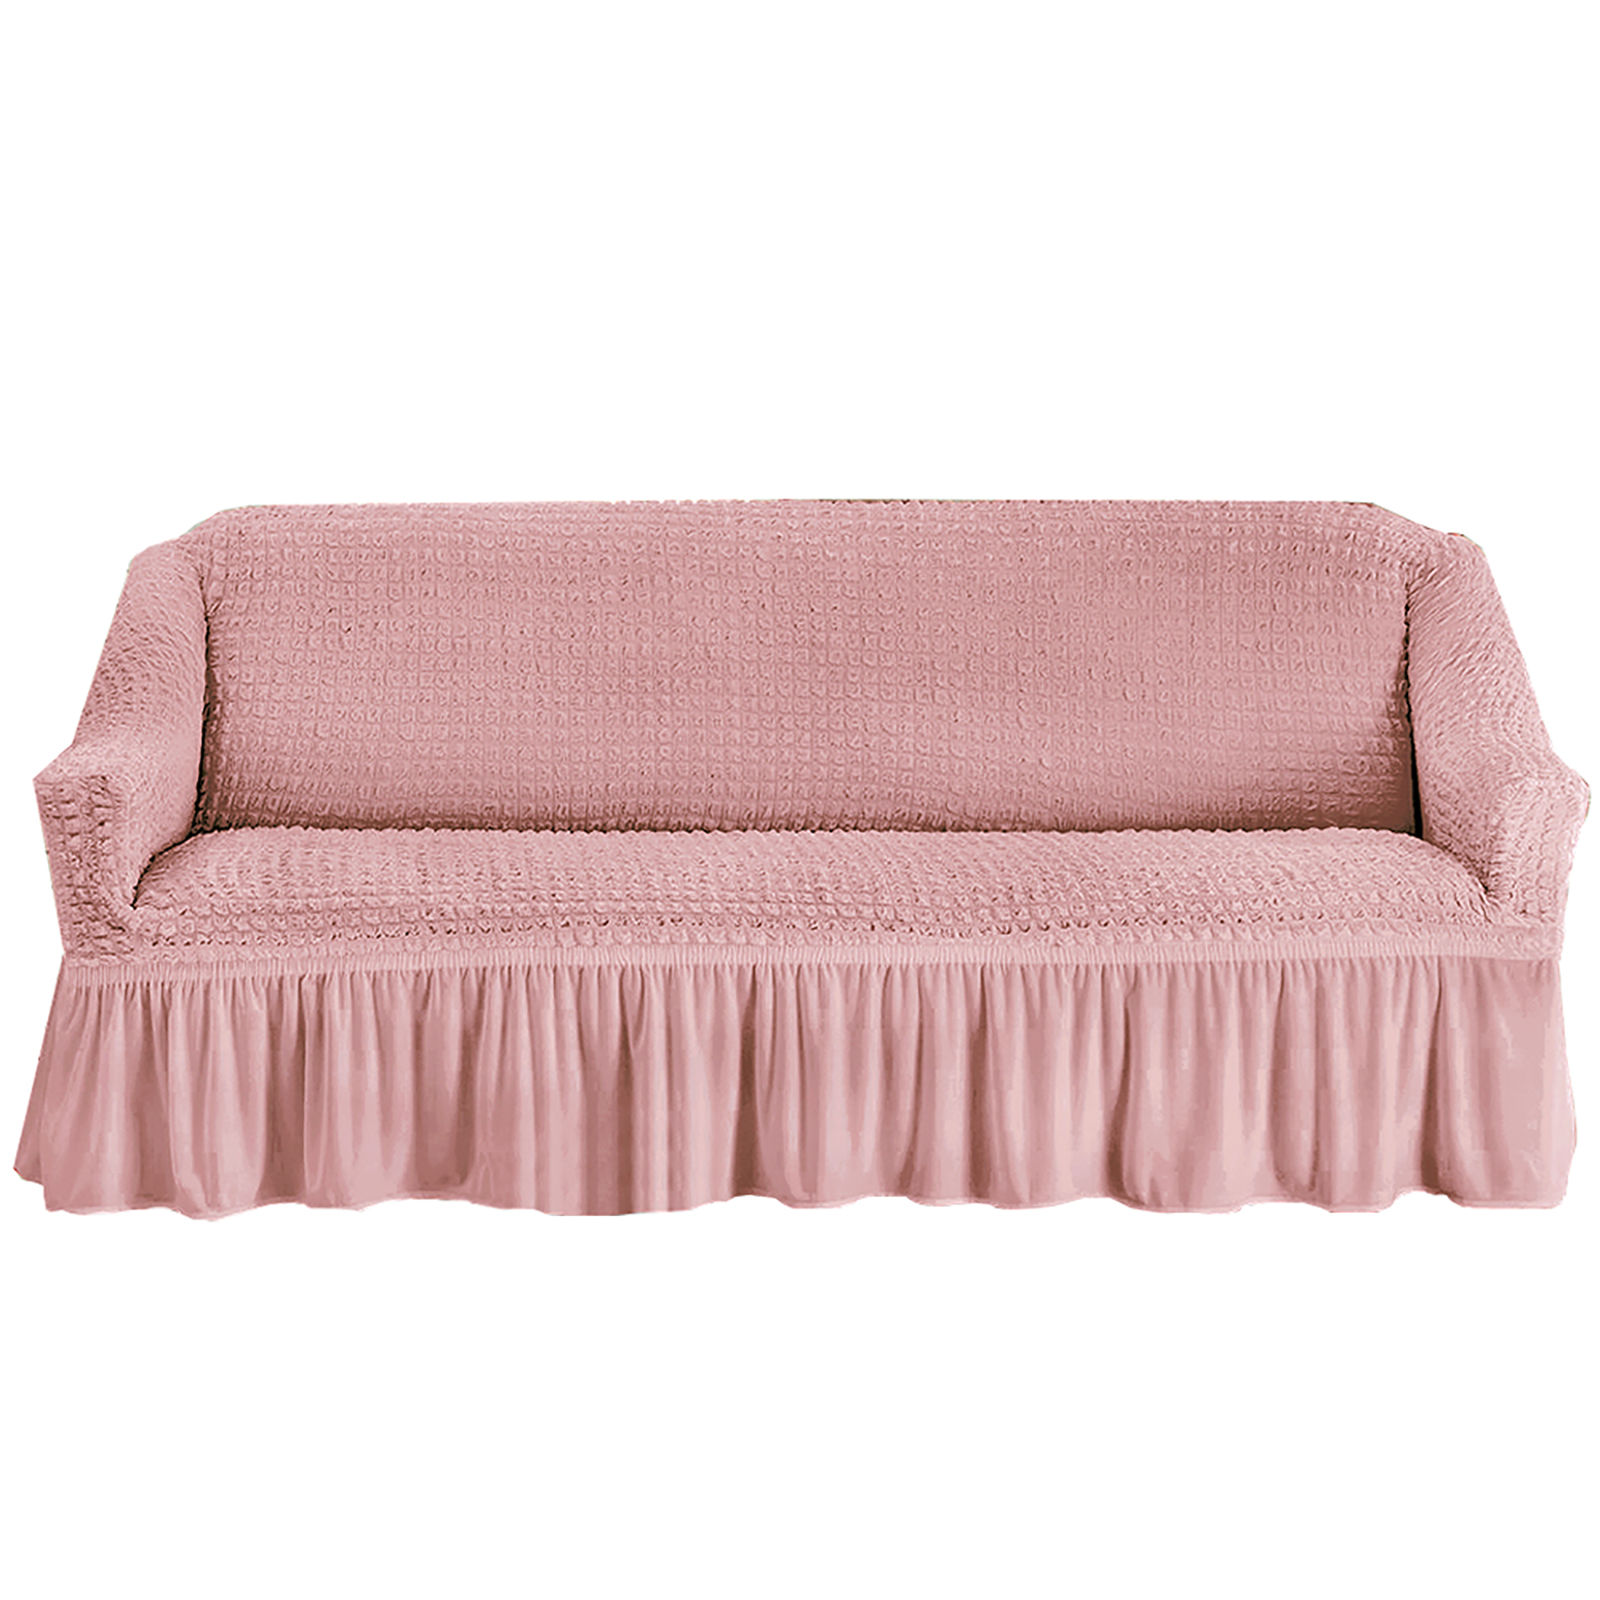 Stretch Sofa Slipcover, 3 Seater Sofa Slipcovers With Skirt With Armless Soft Sofa Cover Elastic Straps Sofa Slipcover For Living Room Kids Pets-Pink-Medium